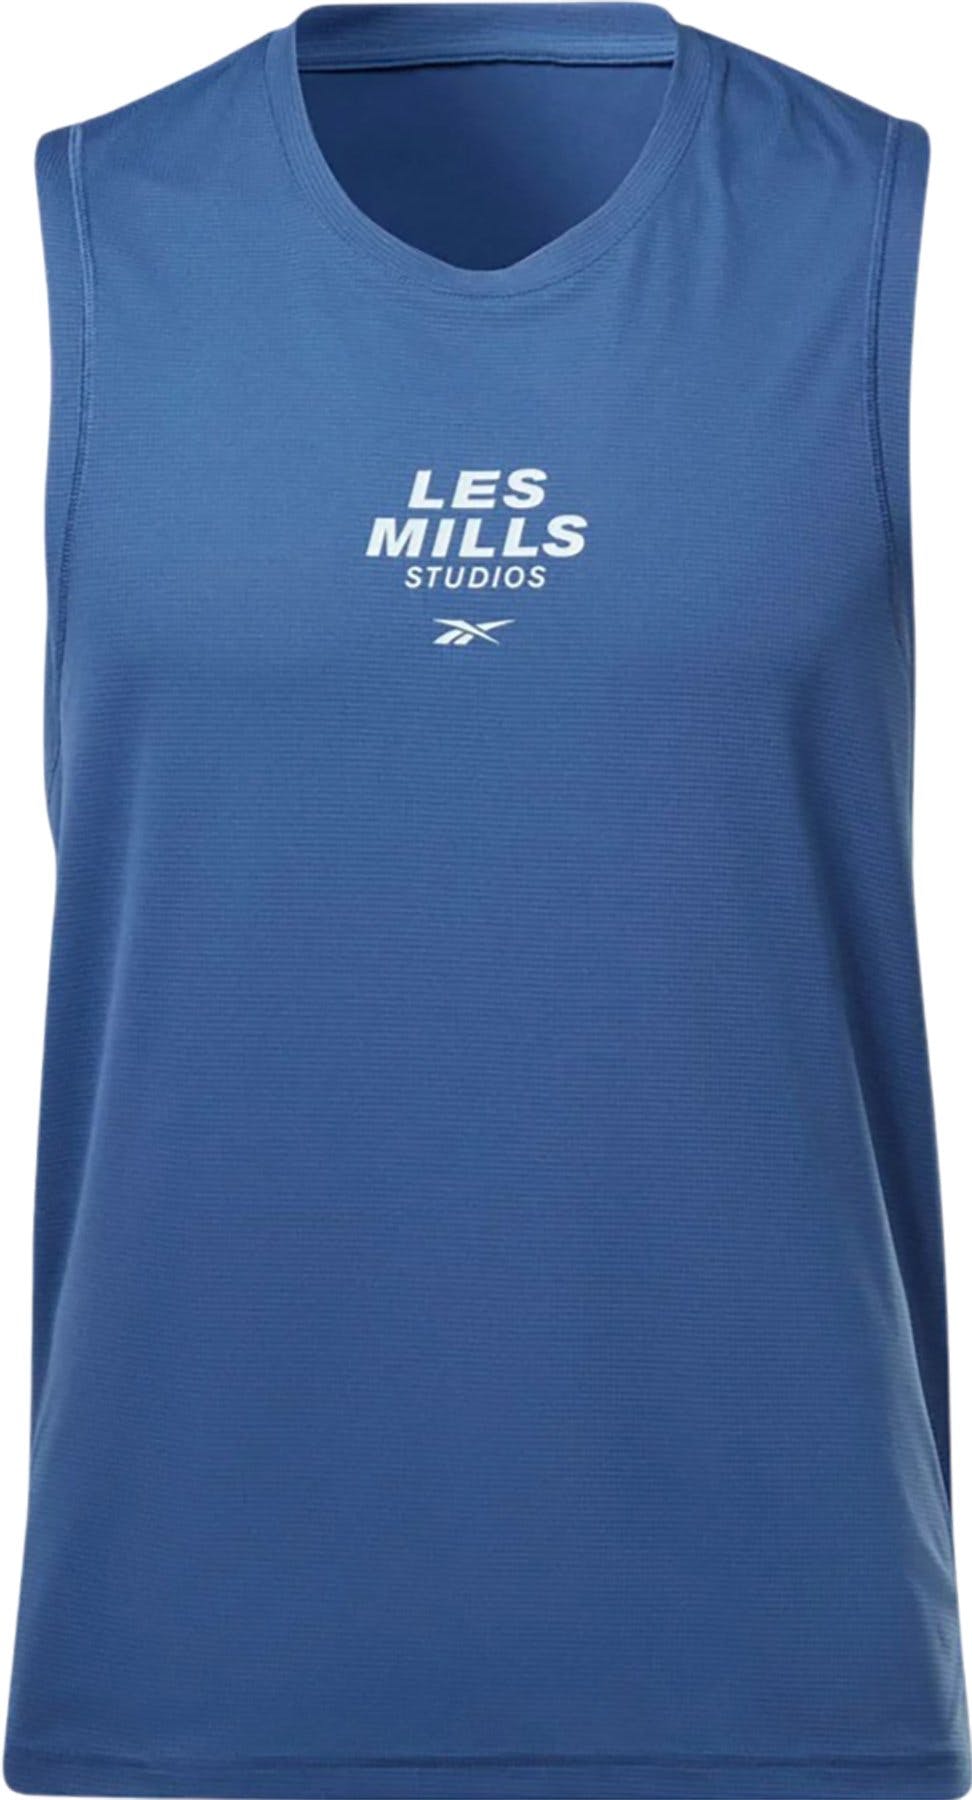 Product image for Les Mills Speed Tank Top - Men's